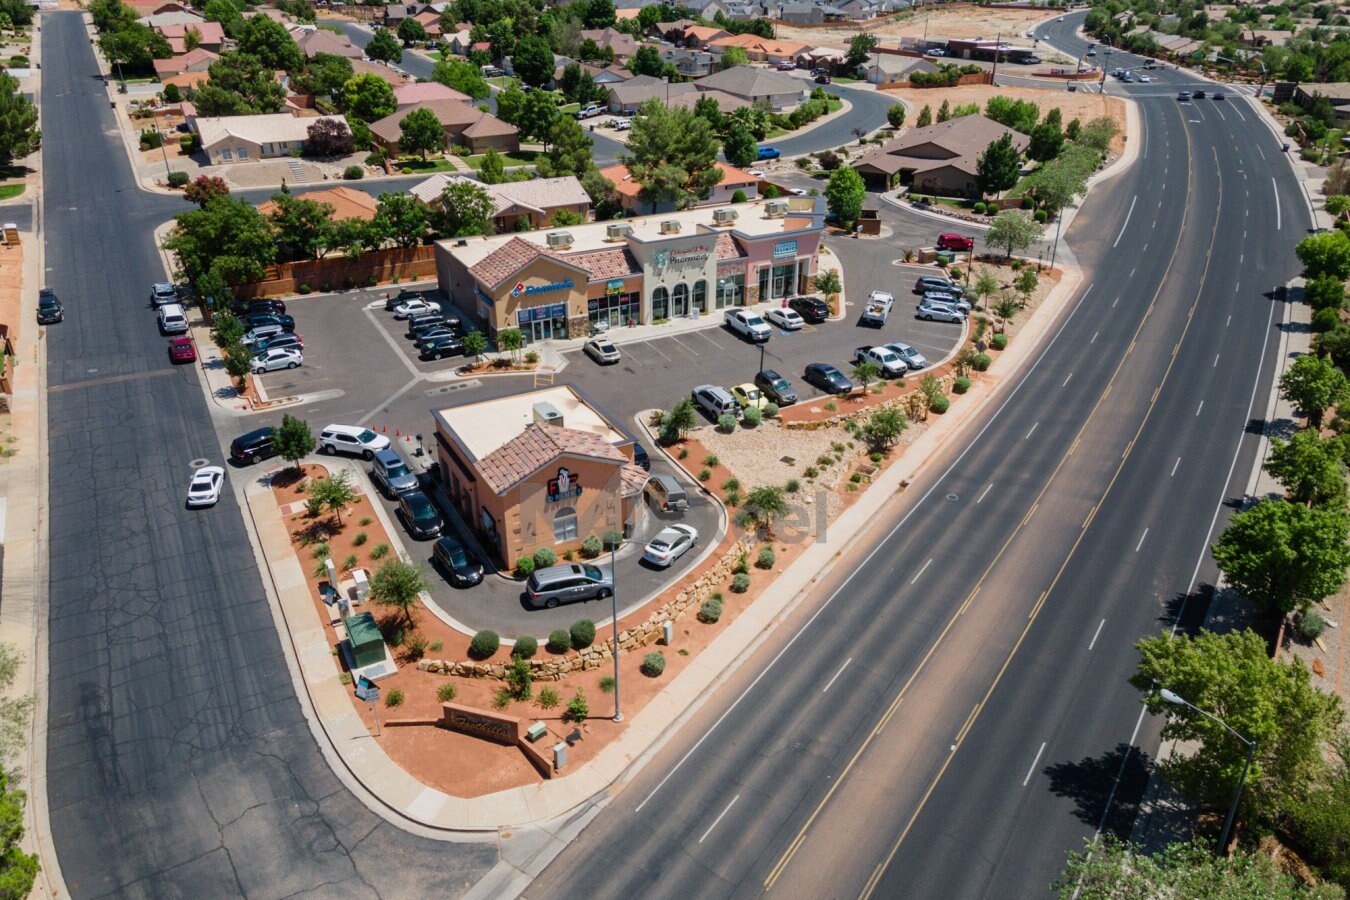 Drone picture of Foothill Commons